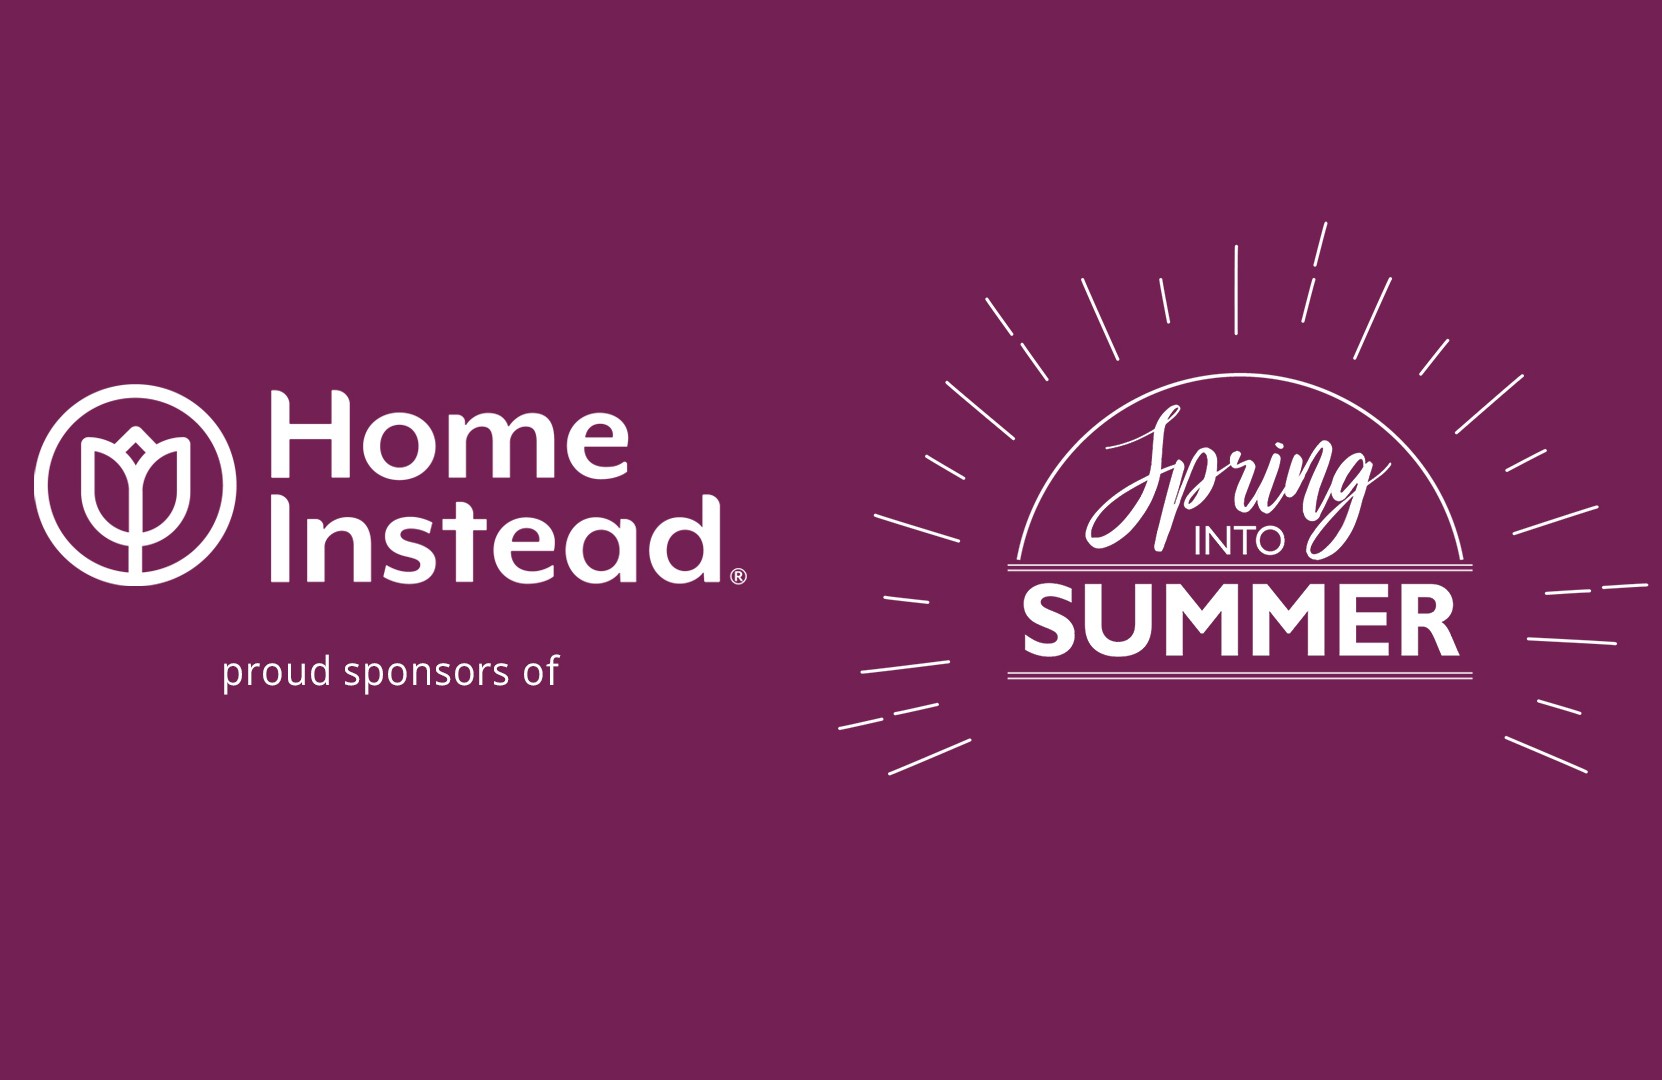 Home Instead ramps up TV presence with second sponsorship deal